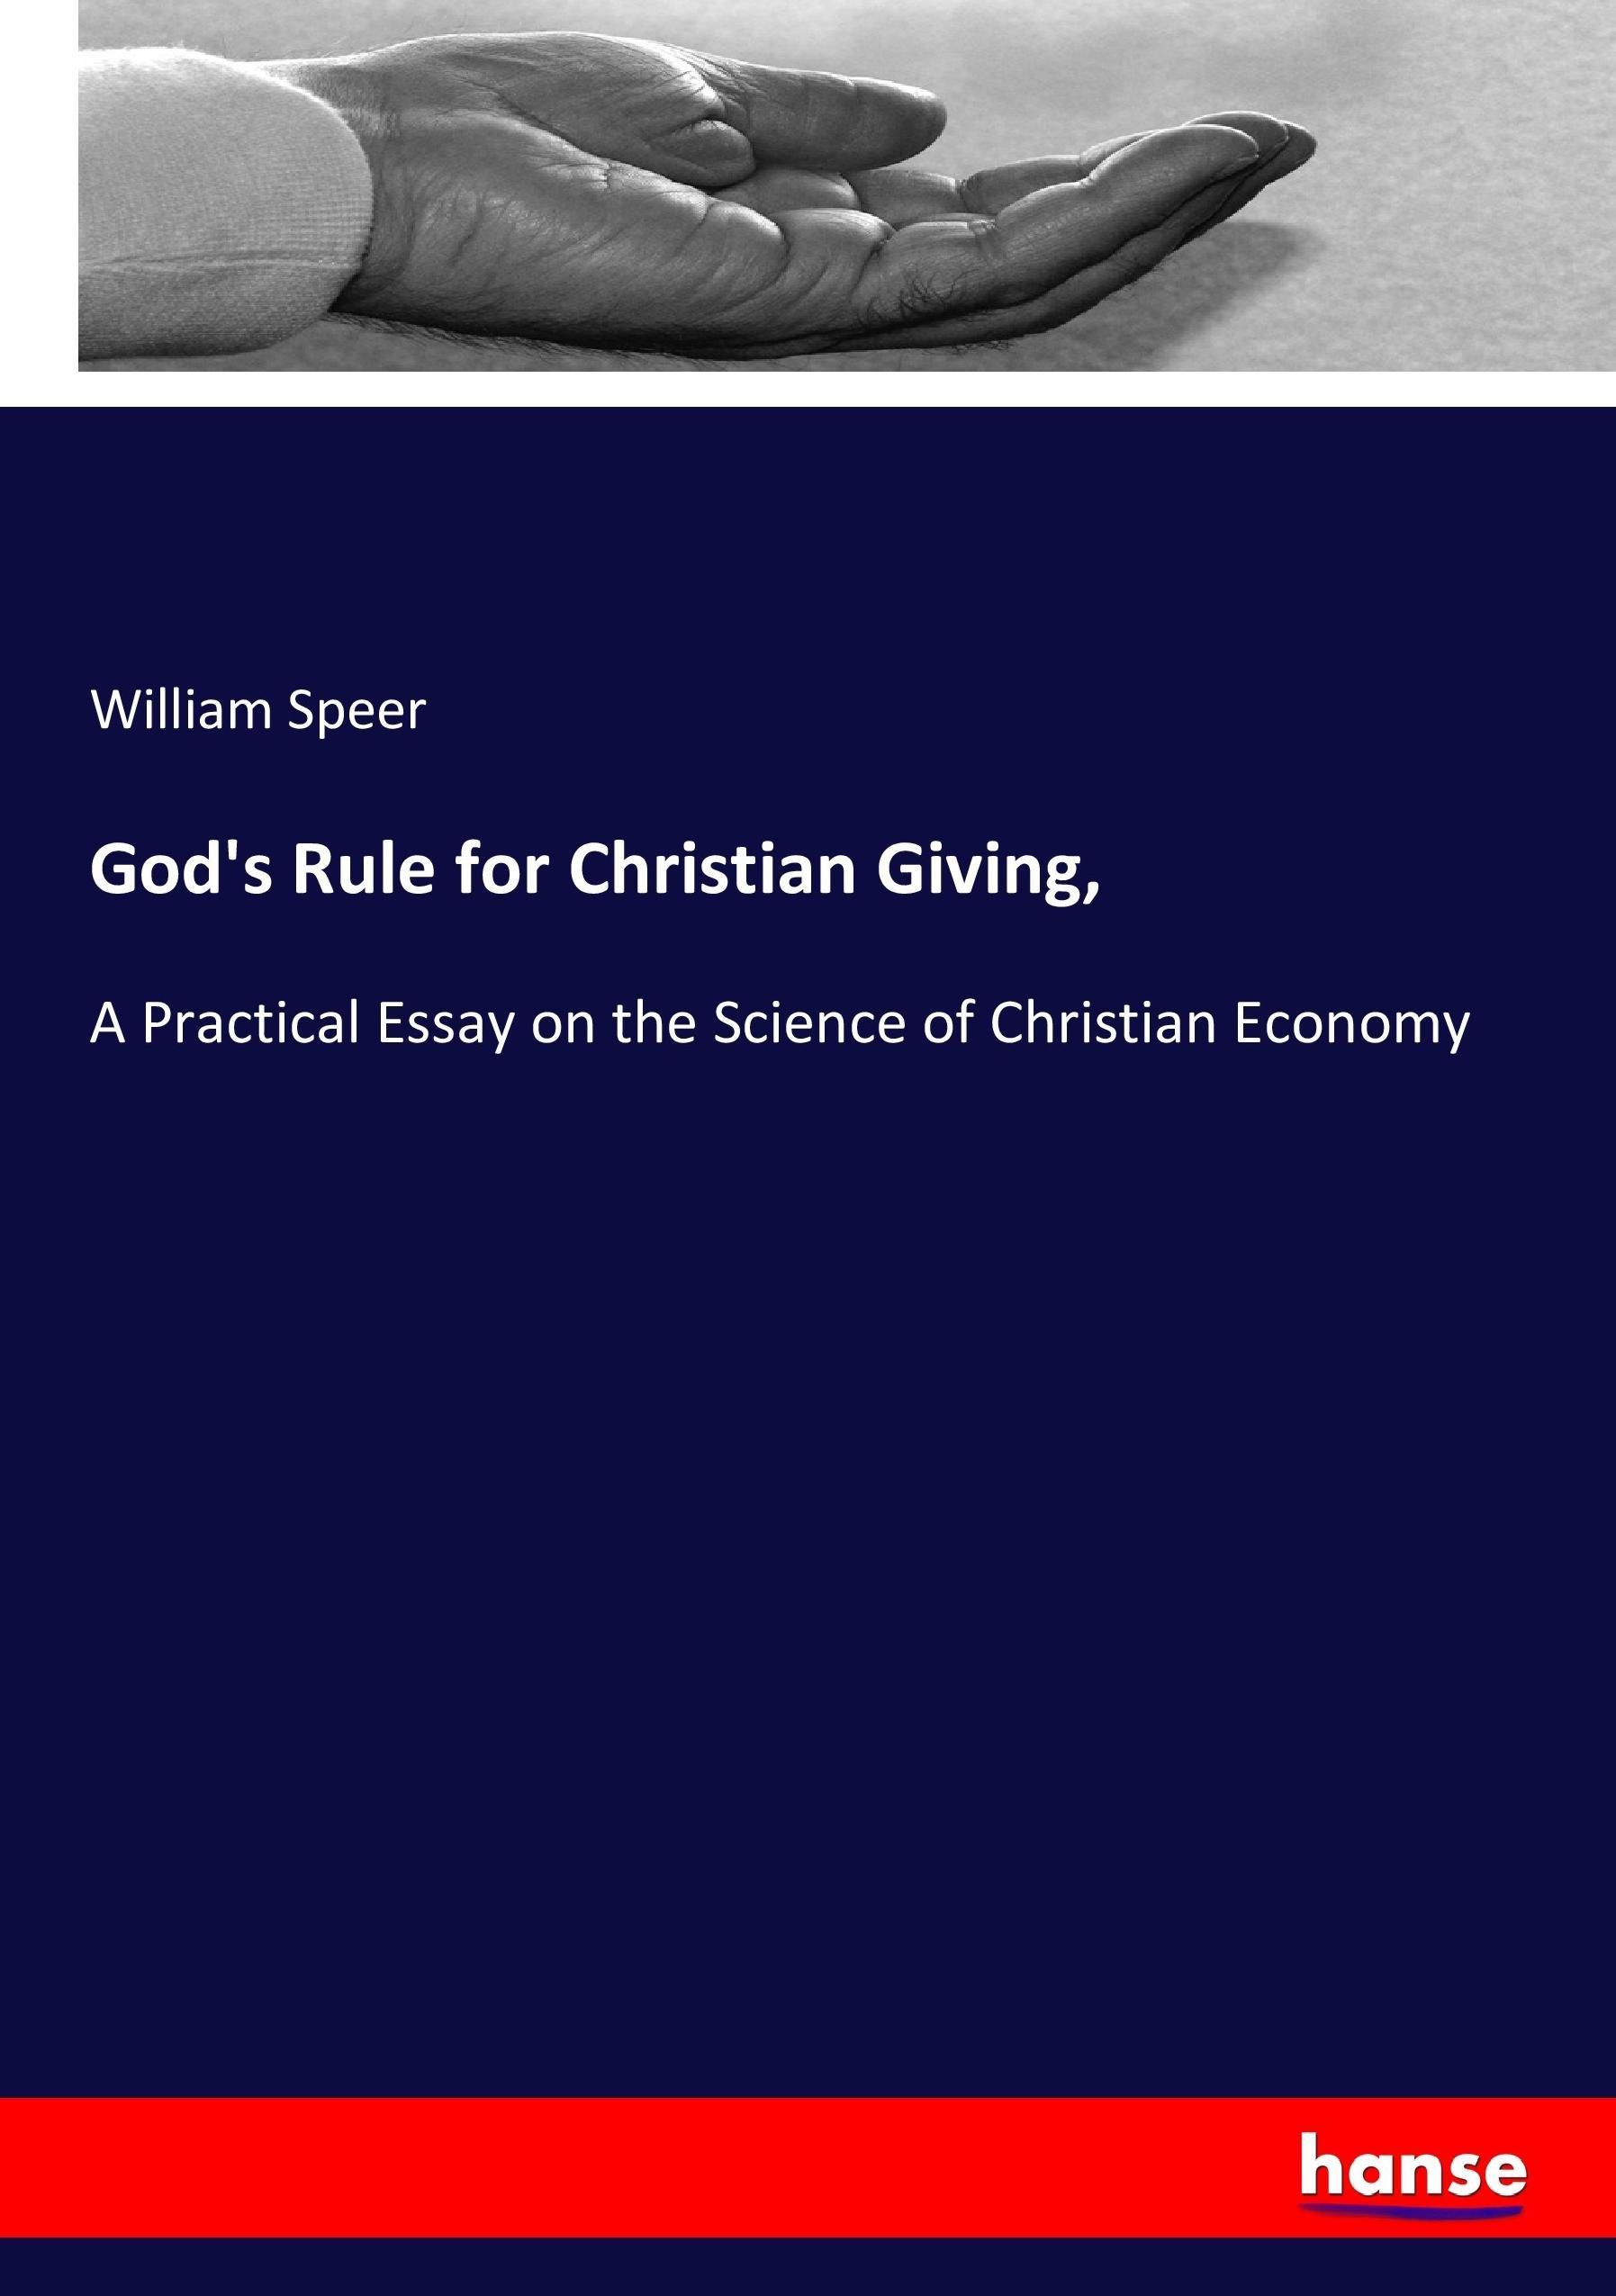 God's Rule for Christian Giving, | A Practical Essay on the Science of Christian Economy | William Speer | Taschenbuch | Paperback | 276 S. | Englisch | 2017 | hansebooks | EAN 9783744641098 - Speer, William